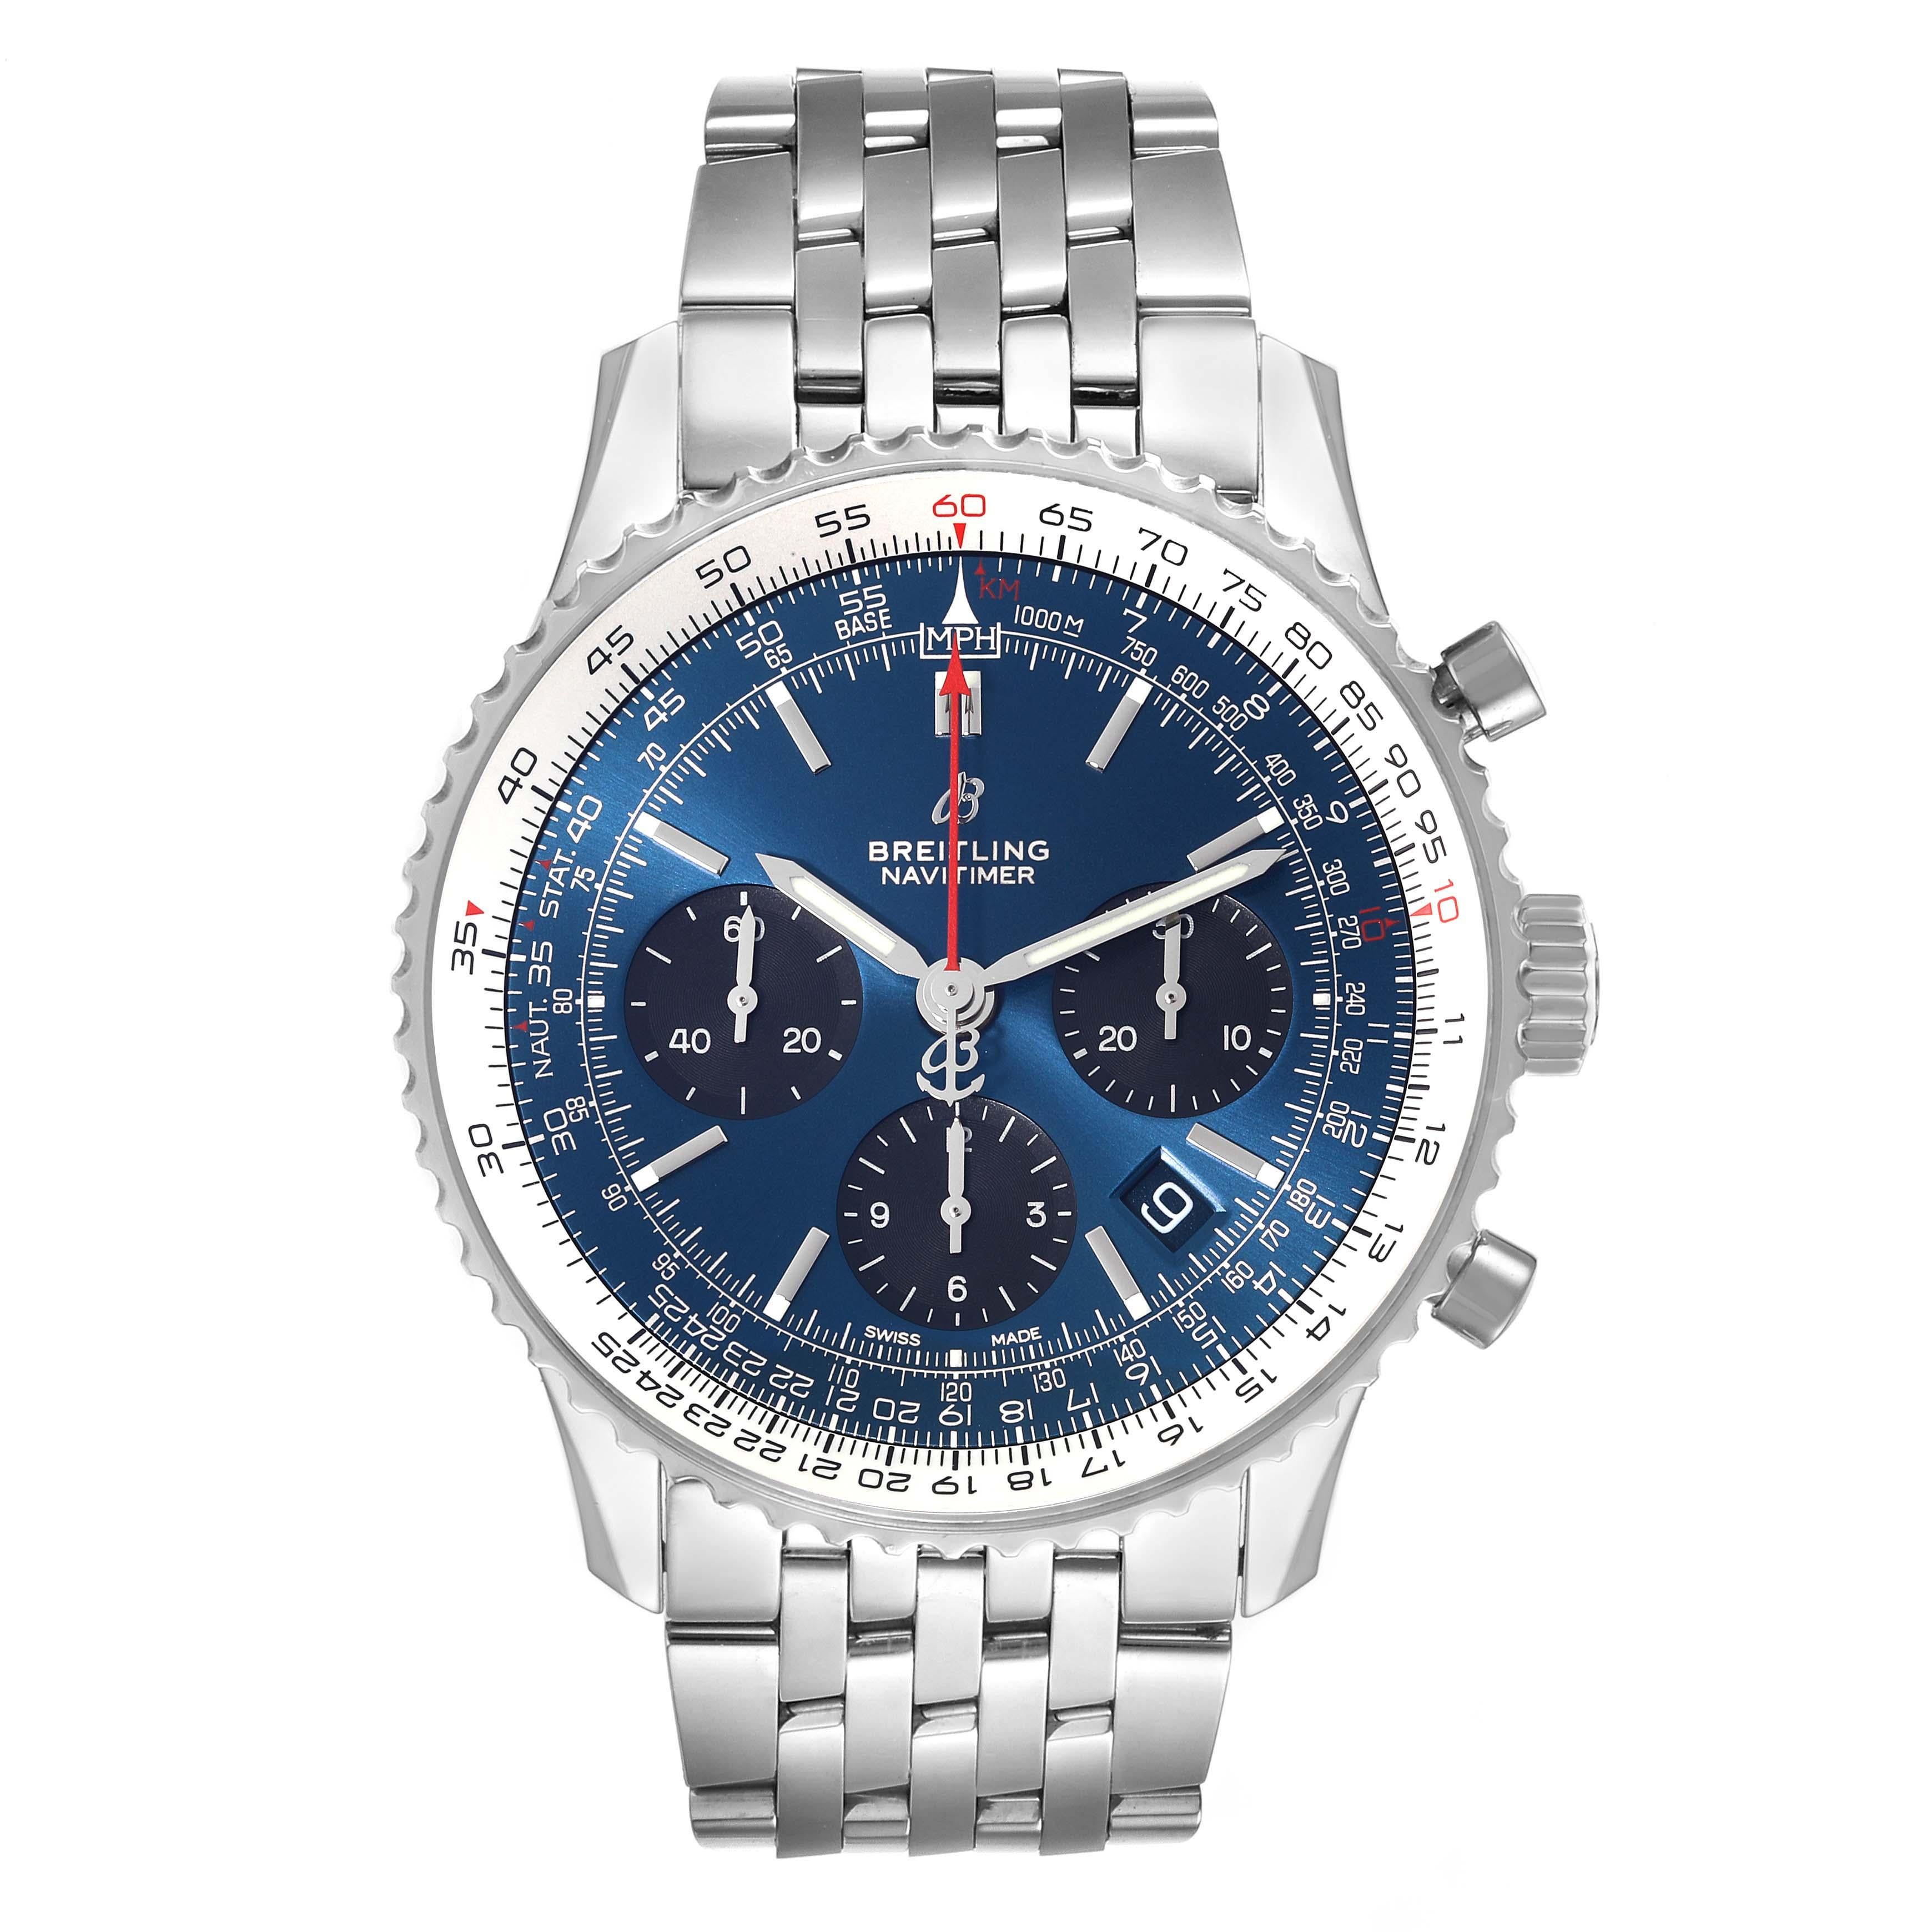 Breitling Navitimer 01 Blue Dial Steel Mens Watch AB0121 Box Card. Self-winding automatic officially certified chronometer movement. Chronograph function. Stainless steel case 43 mm in diameter. Case thickness 14.25 mm. Transparent exhibition